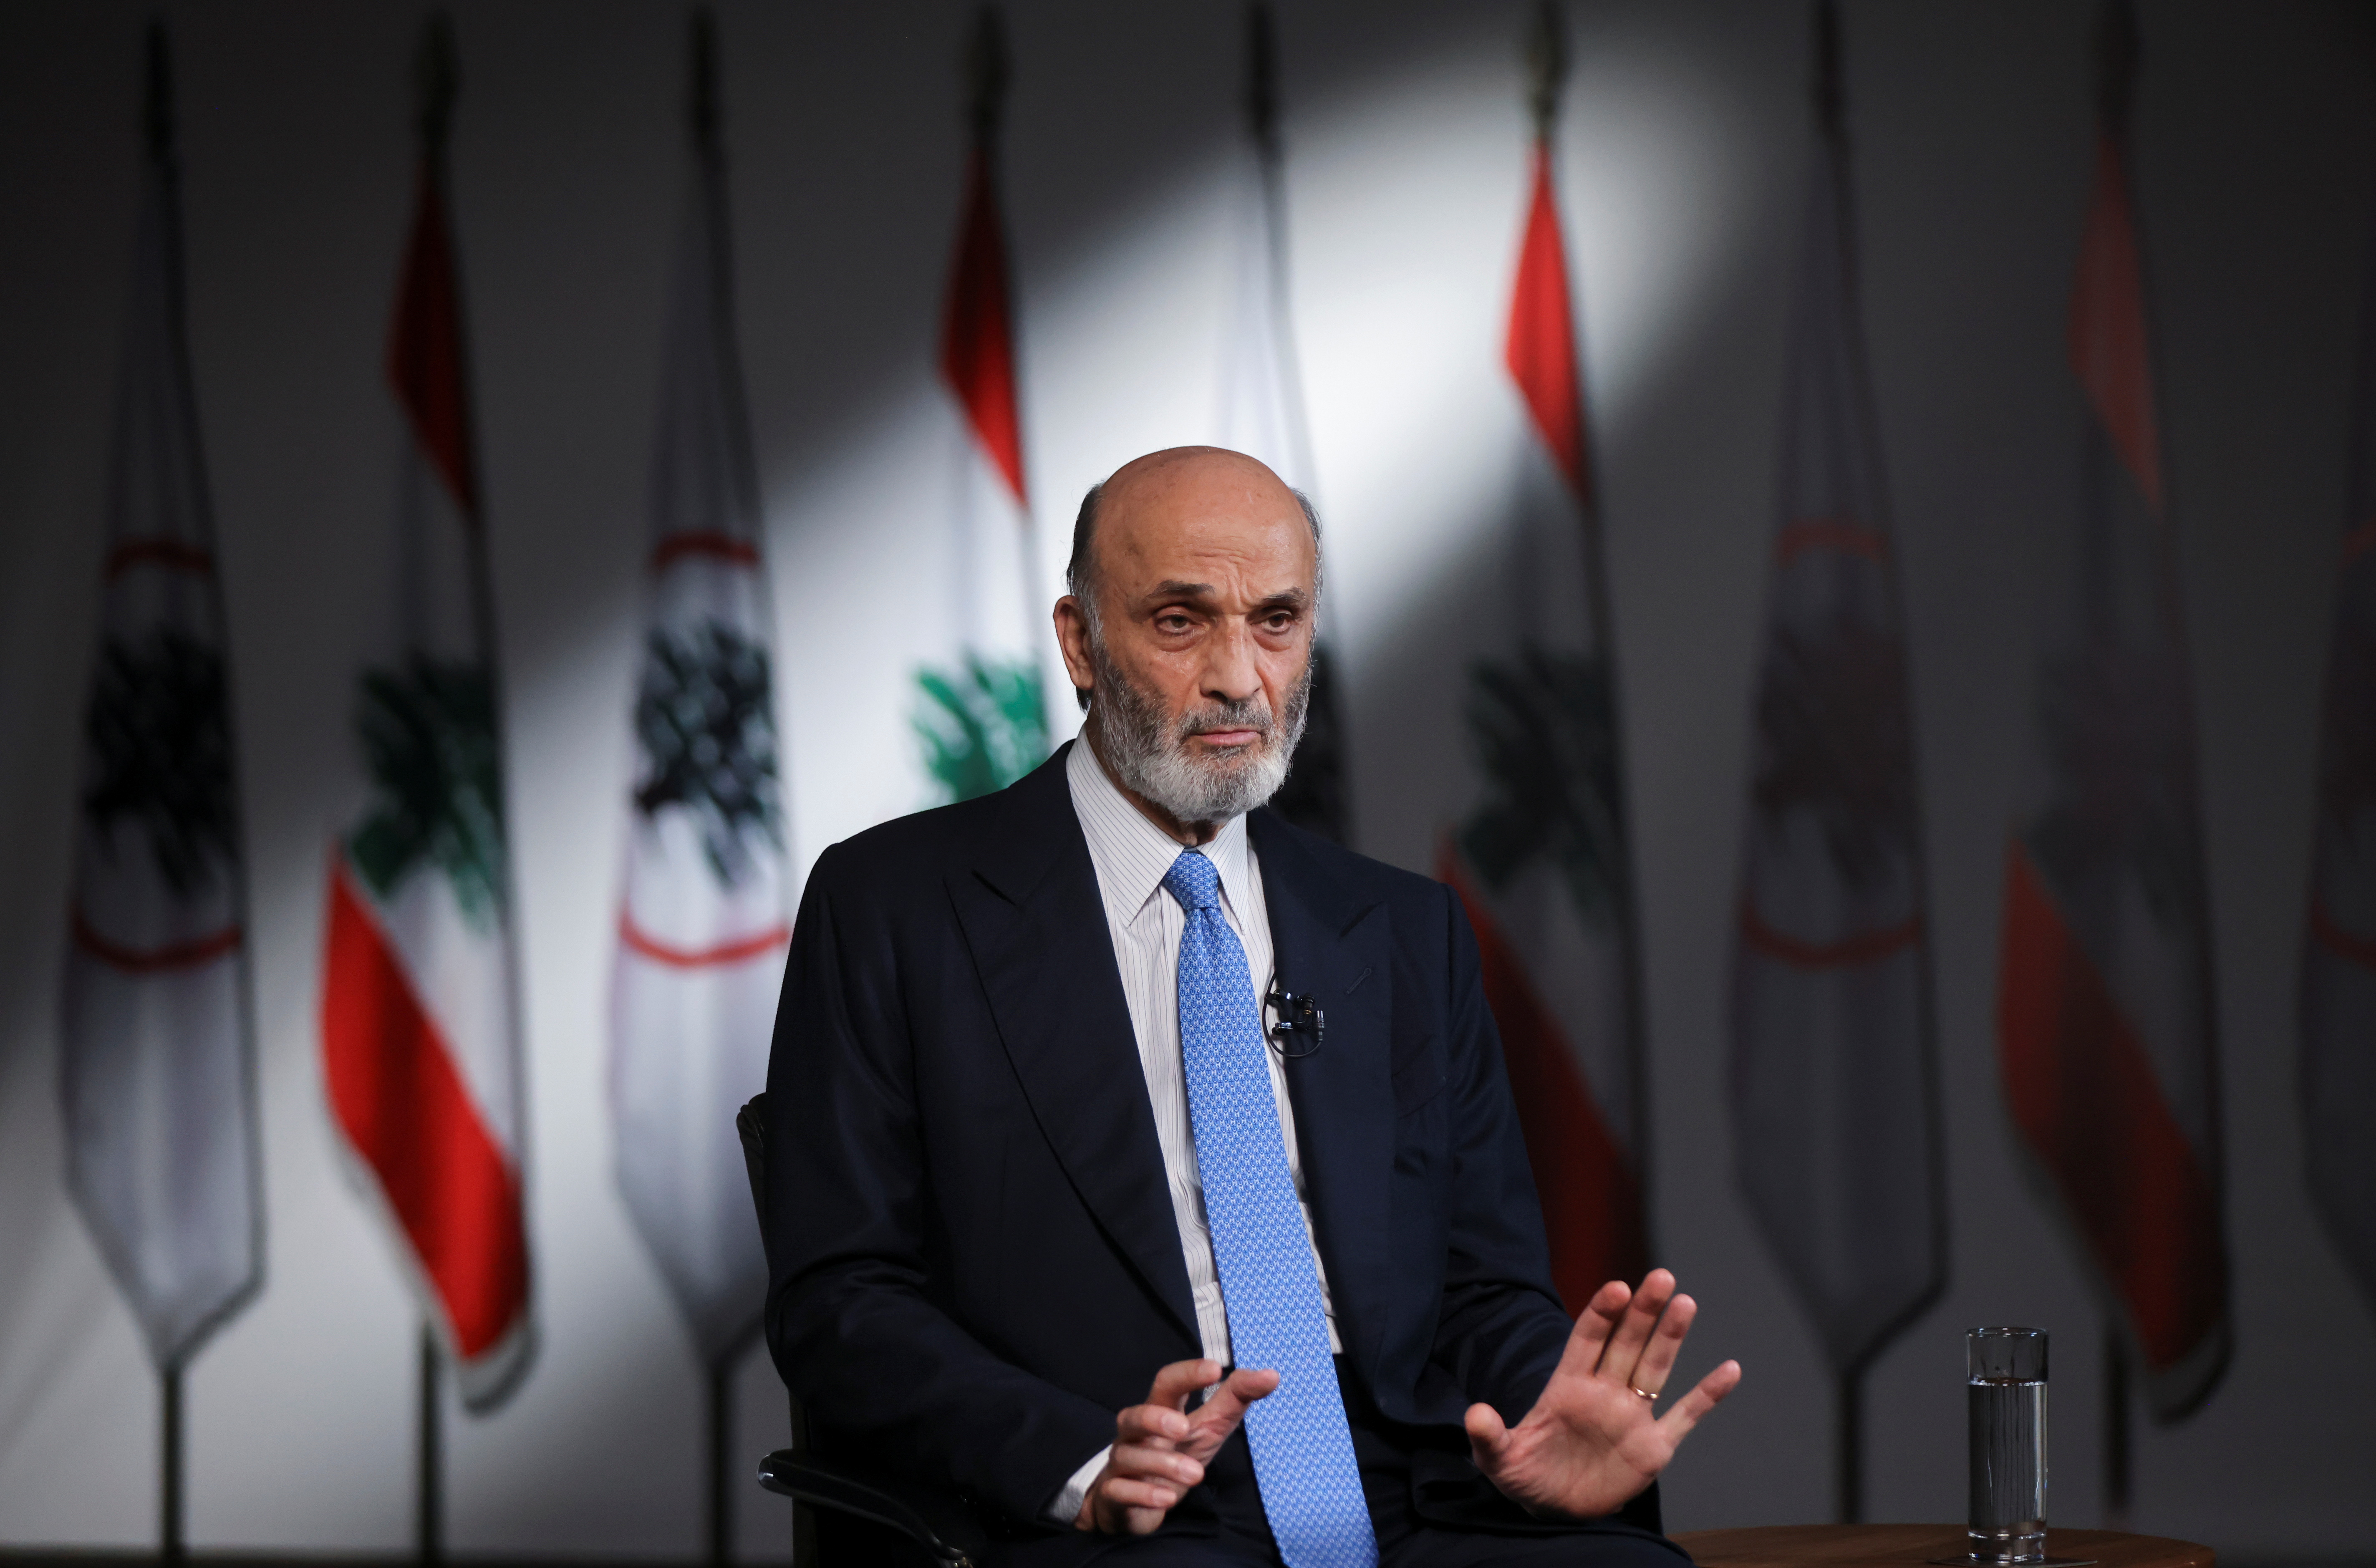 Samir Geagea, the leader of Lebanon's Christian Lebanese Forces (LF) party, speaks during an interview with Reuters at his residence in Maarab, Lebanon November 29, 2021. REUTERS/Mohamed Azakir